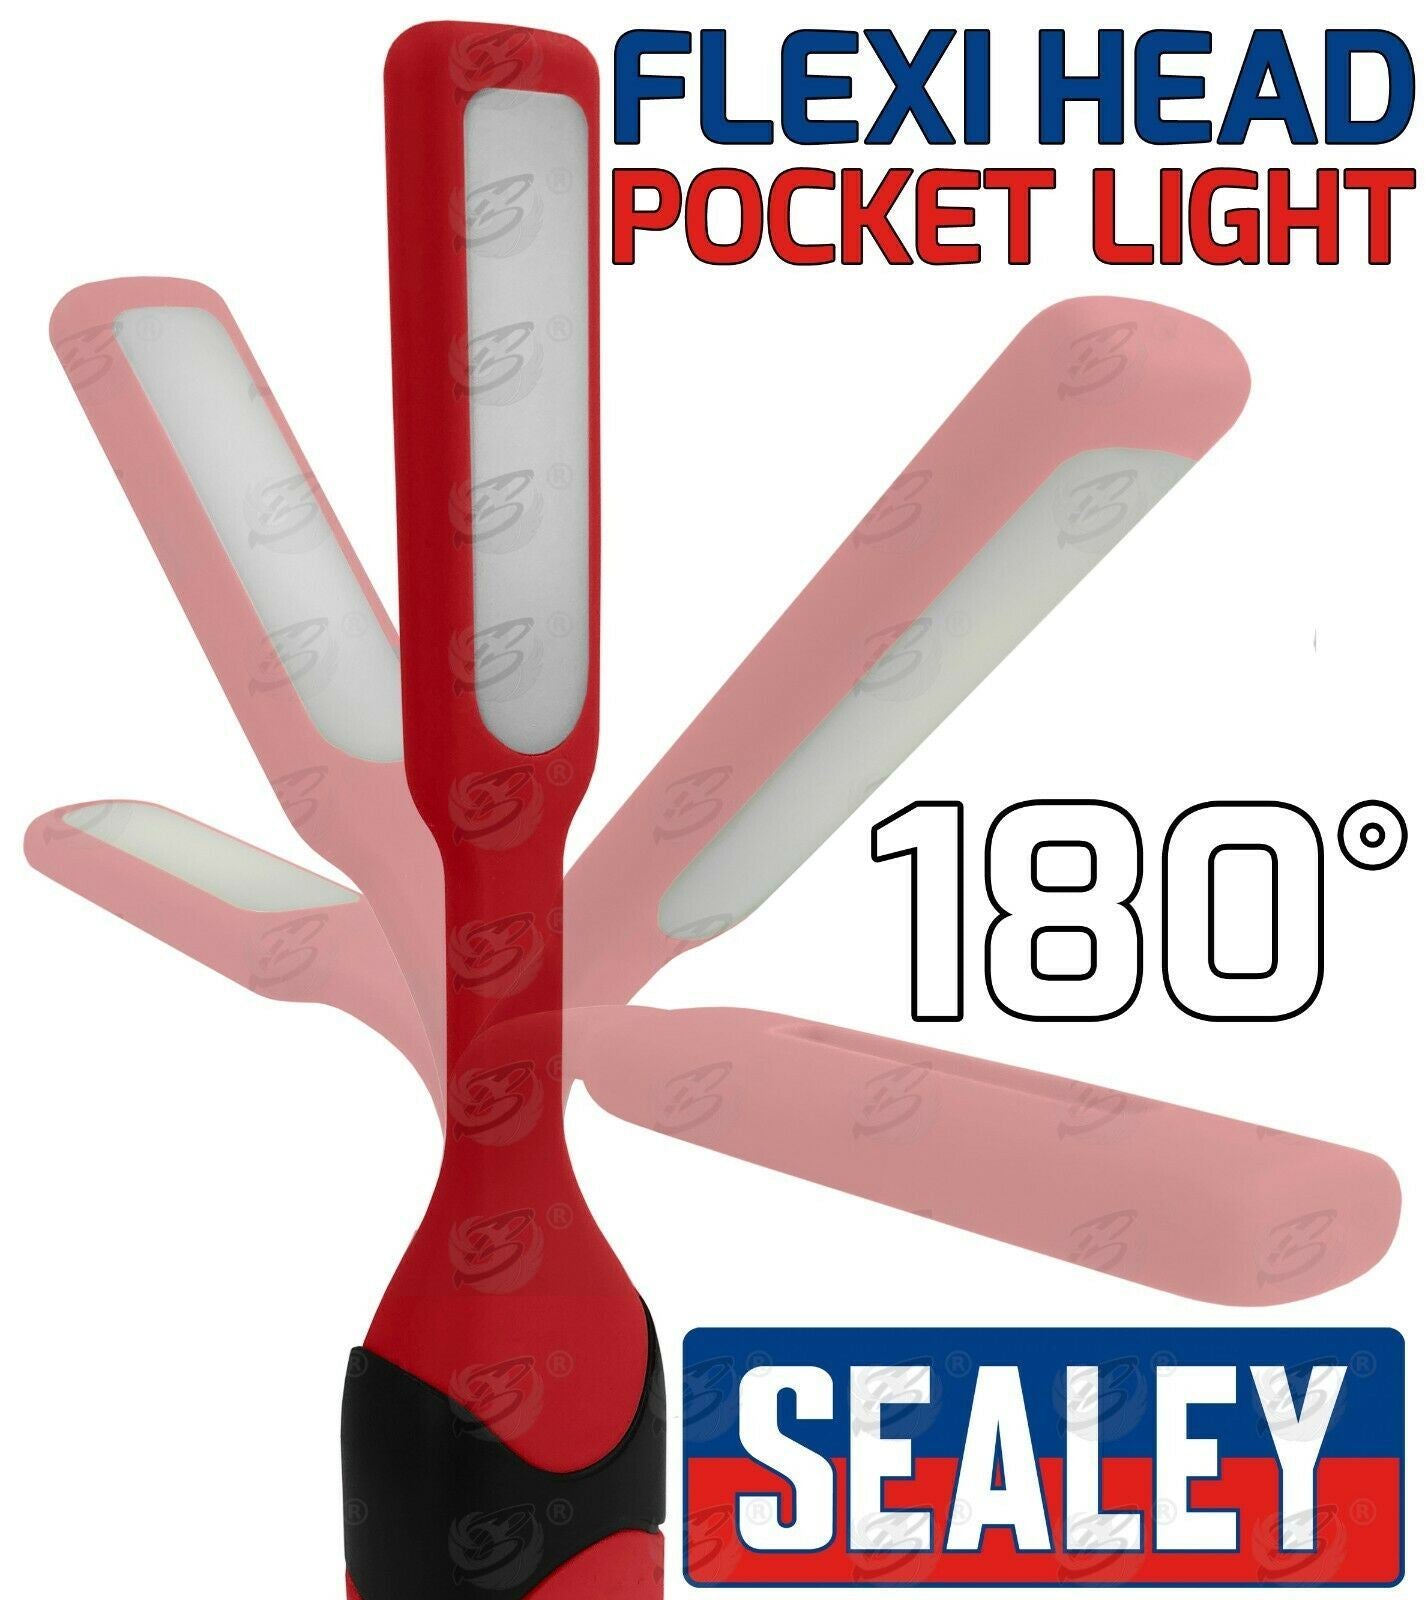 SEALEY SMD LED FLEXIBLE MAGNETIC POCKET INSPECTION TORCH ( RED )